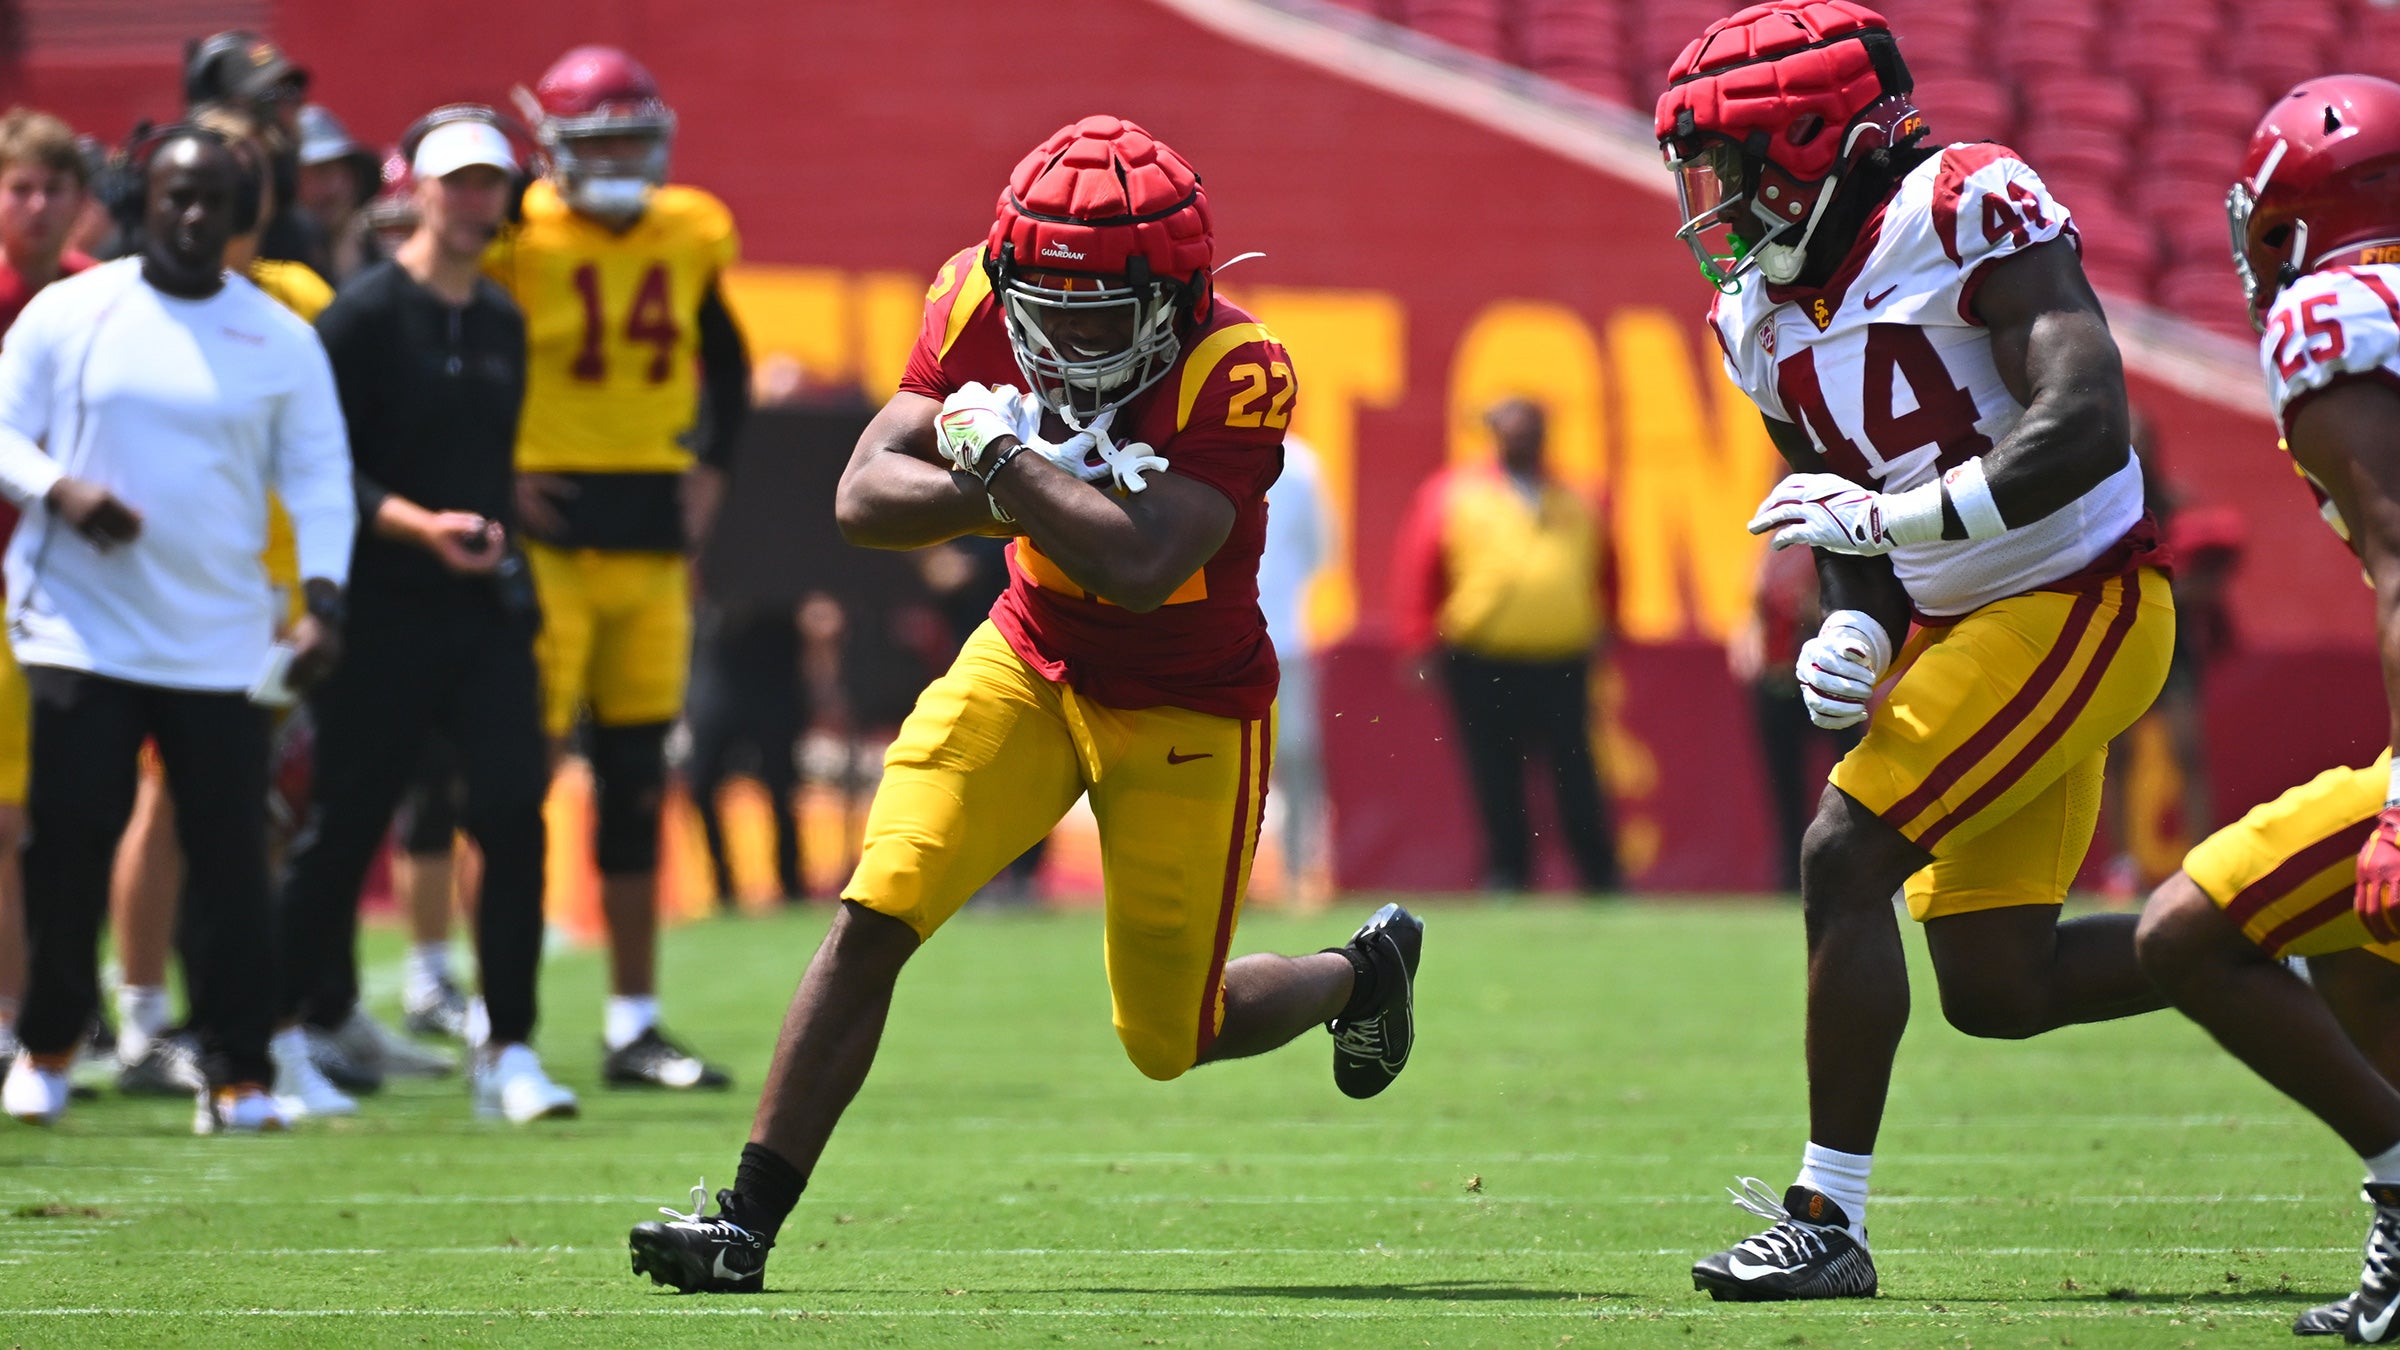 USC spring football game: A’Marion Peterson